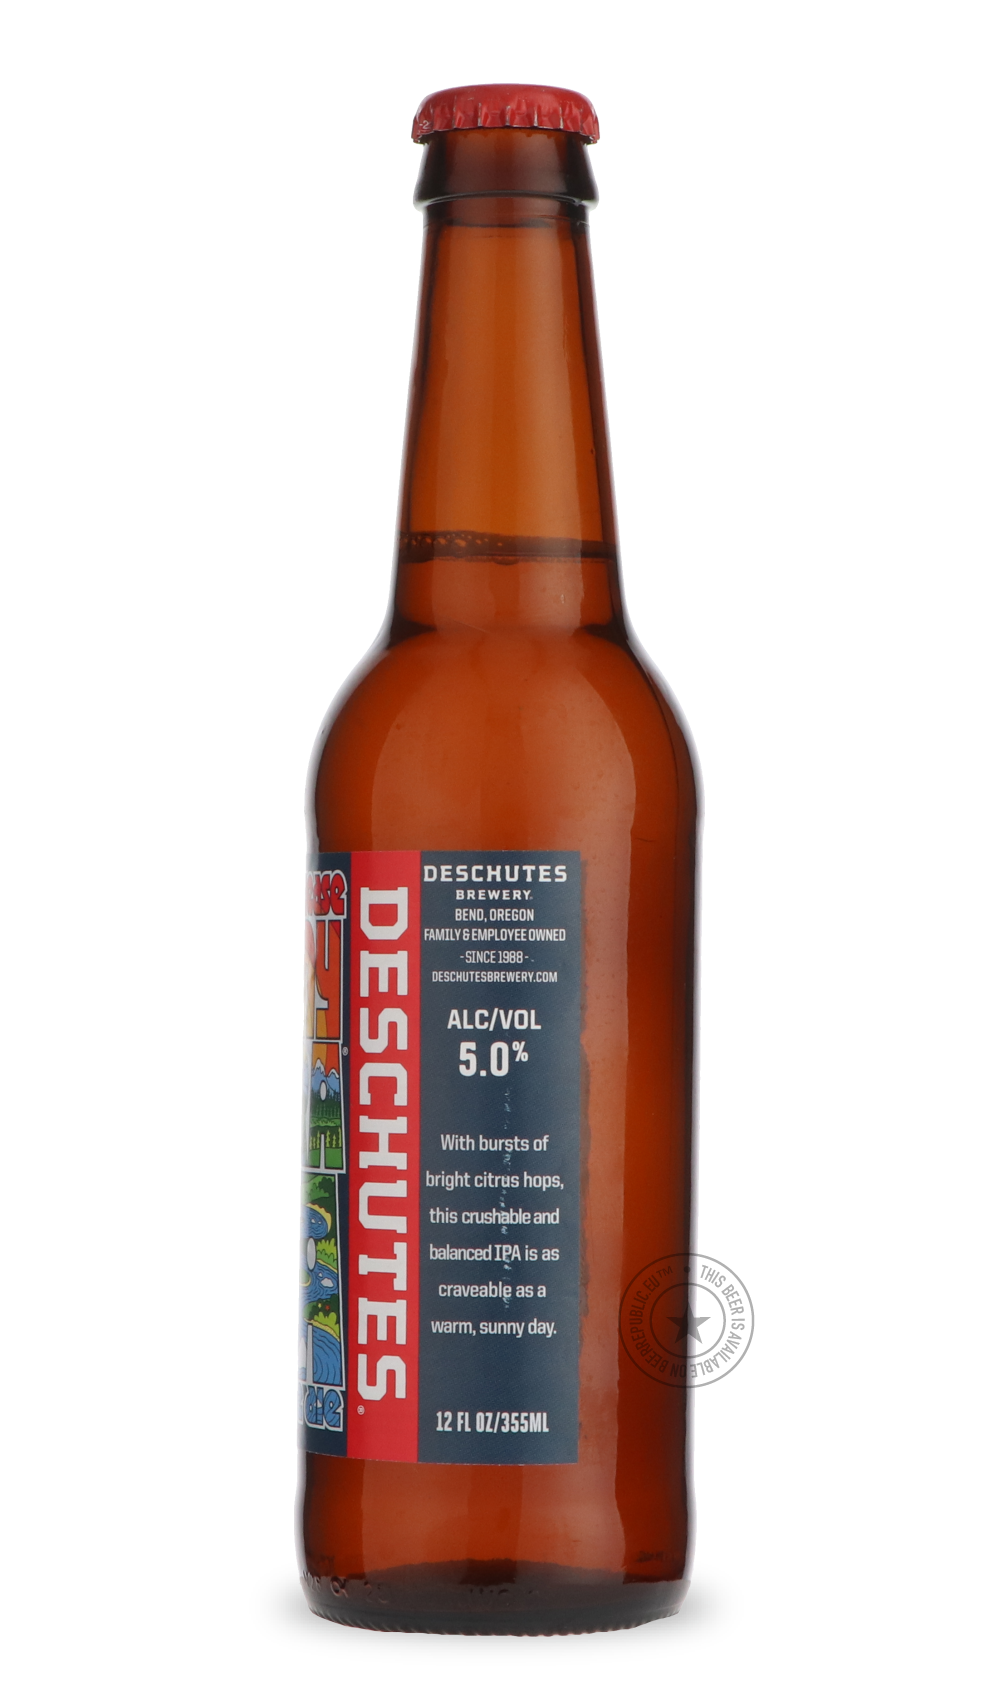 -Deschutes- Sunny Citra-IPA- Only @ Beer Republic - The best online beer store for American & Canadian craft beer - Buy beer online from the USA and Canada - Bier online kopen - Amerikaans bier kopen - Craft beer store - Craft beer kopen - Amerikanisch bier kaufen - Bier online kaufen - Acheter biere online - IPA - Stout - Porter - New England IPA - Hazy IPA - Imperial Stout - Barrel Aged - Barrel Aged Imperial Stout - Brown - Dark beer - Blond - Blonde - Pilsner - Lager - Wheat - Weizen - Amber - Barley Wi